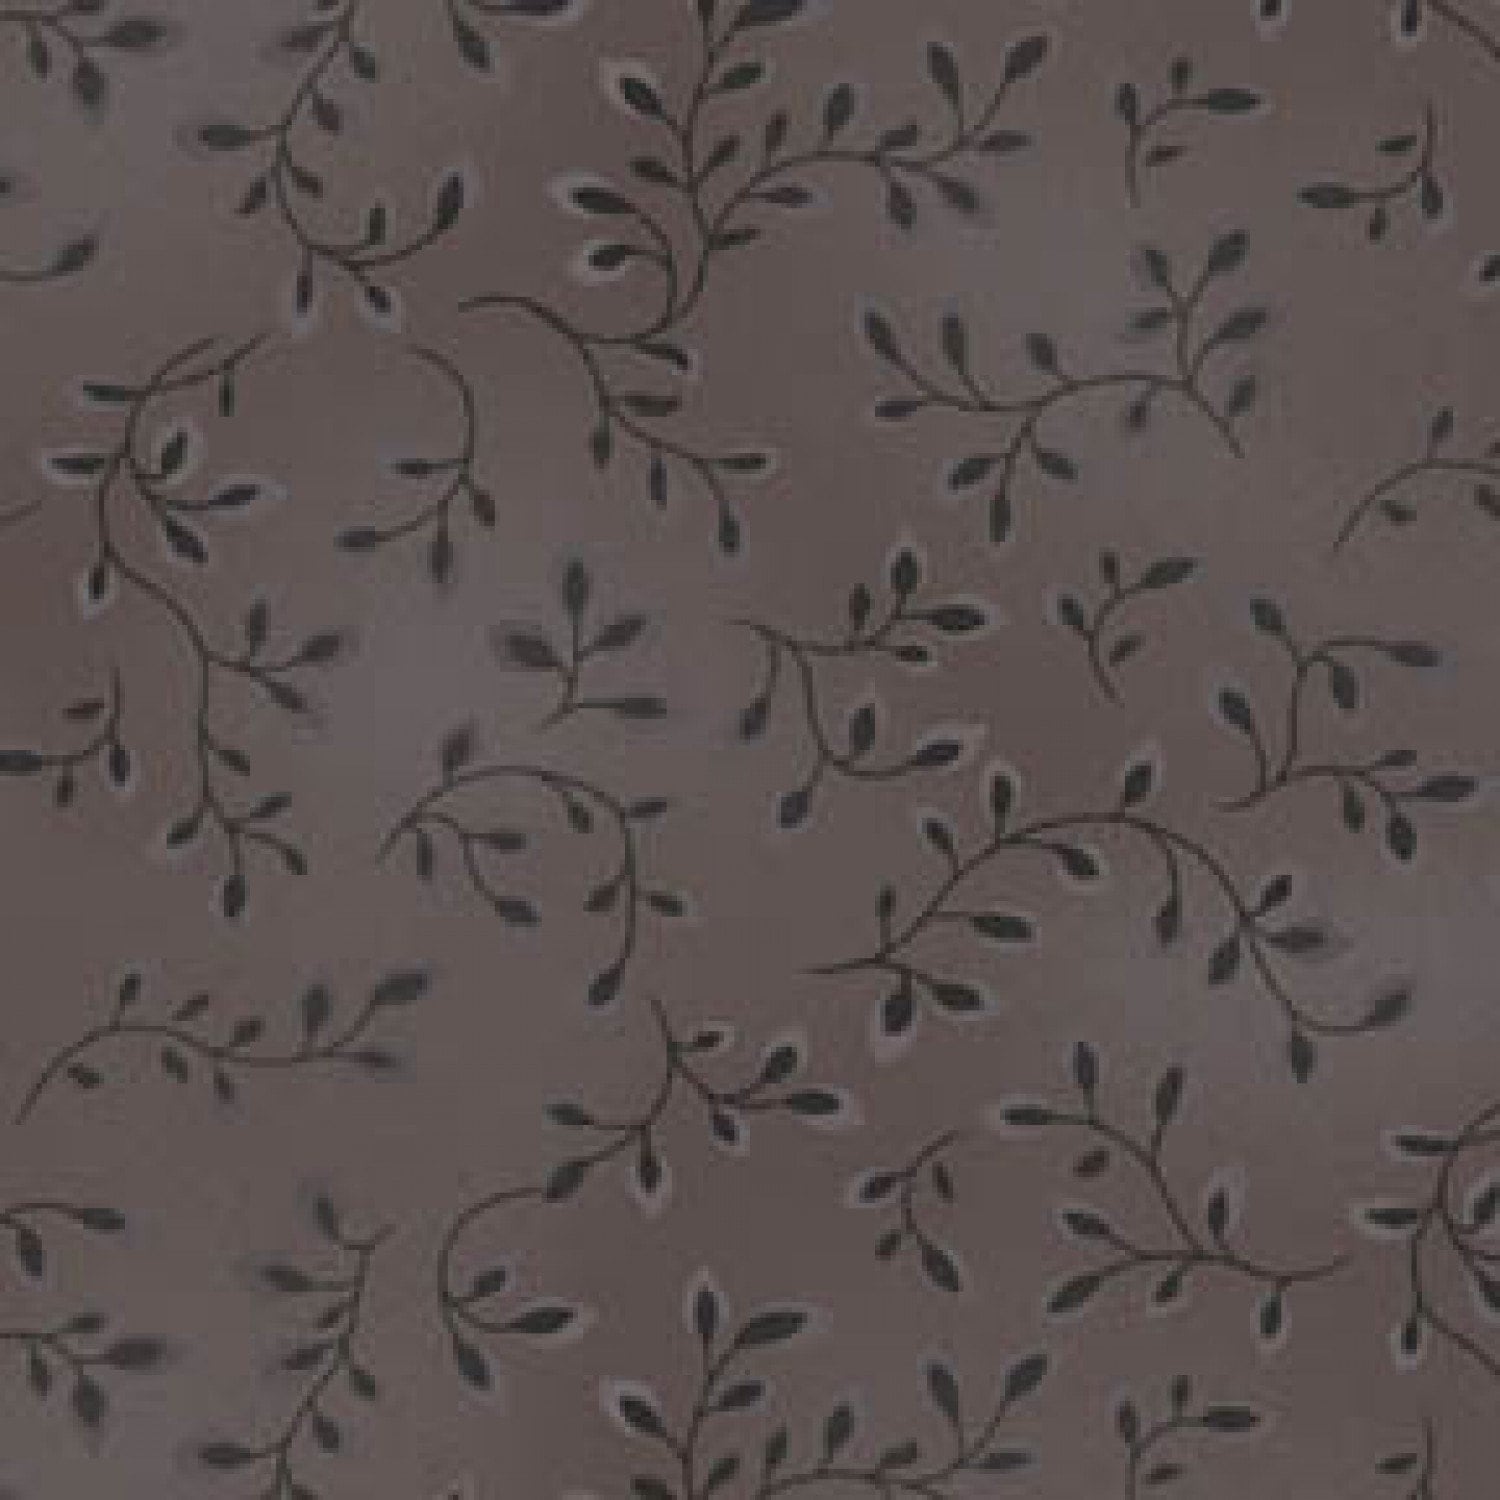 Pale Grey Cotton Fabric by the Yard 7755-91 Henry Glass Folio by Color Principle Vines